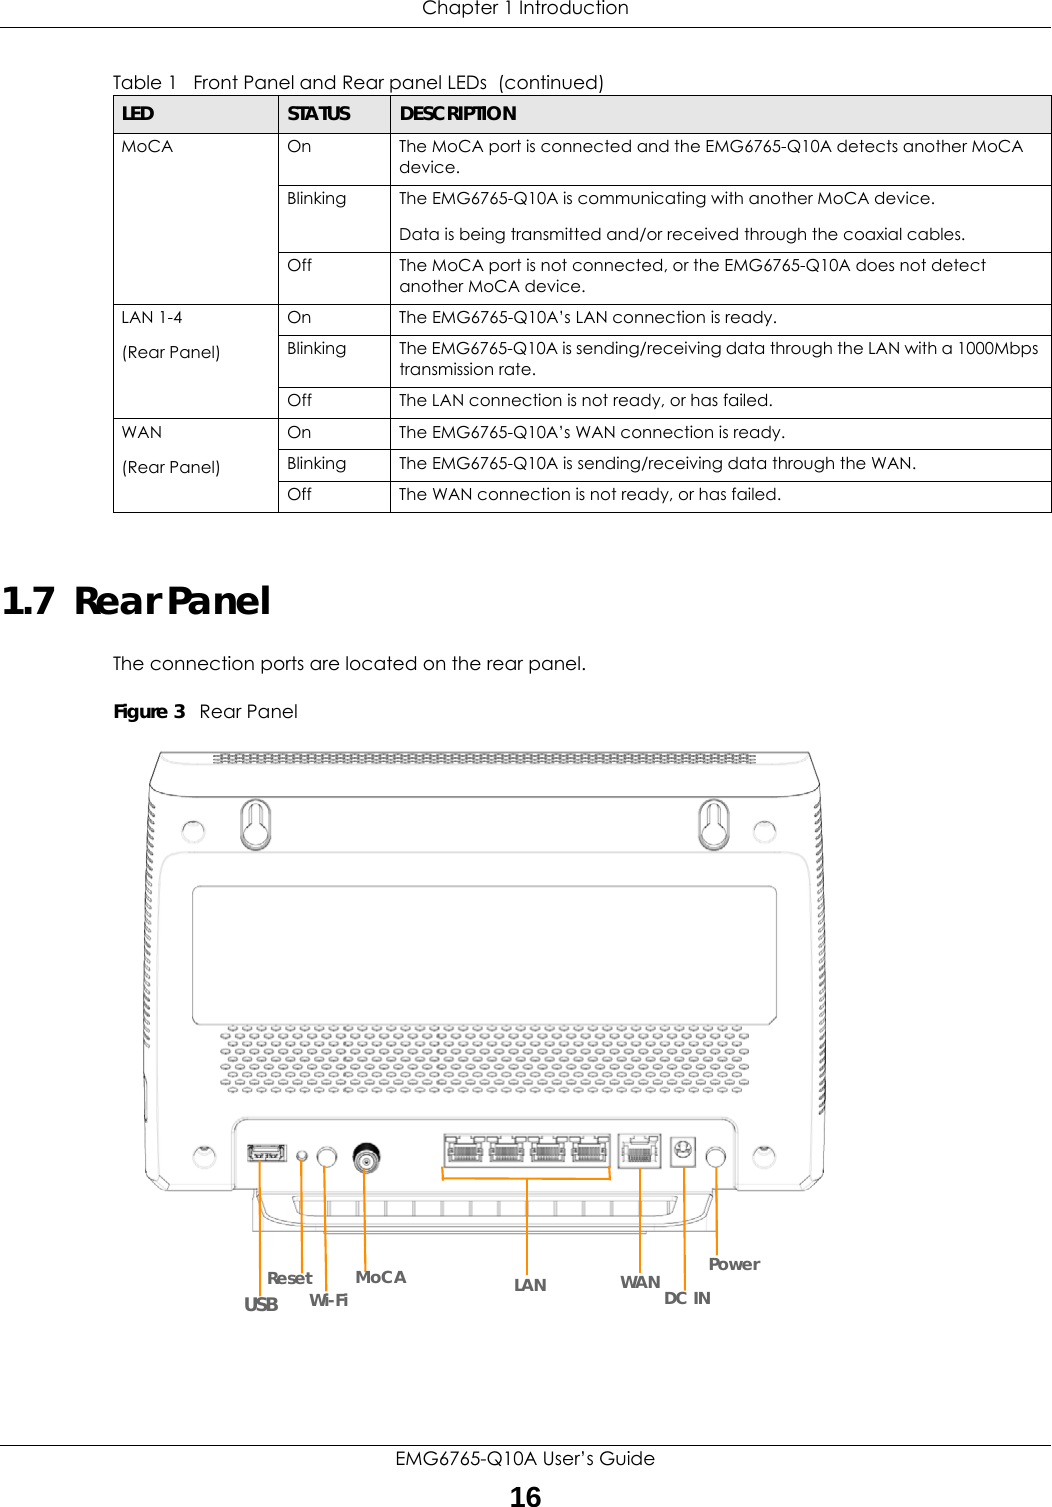 Chapter 1 IntroductionEMG6765-Q10A User’s Guide161.7  Rear PanelThe connection ports are located on the rear panel. Figure 3   Rear PanelMoCA On The MoCA port is connected and the EMG6765-Q10A detects another MoCA device.Blinking The EMG6765-Q10A is communicating with another MoCA device. Data is being transmitted and/or received through the coaxial cables.Off The MoCA port is not connected, or the EMG6765-Q10A does not detect another MoCA device.LAN 1-4(Rear Panel)On The EMG6765-Q10A’s LAN connection is ready. Blinking The EMG6765-Q10A is sending/receiving data through the LAN with a 1000Mbps transmission rate.Off The LAN connection is not ready, or has failed.WAN(Rear Panel)On The EMG6765-Q10A’s WAN connection is ready. Blinking The EMG6765-Q10A is sending/receiving data through the WAN.Off The WAN connection is not ready, or has failed.Table 1   Front Panel and Rear panel LEDs  (continued)LED STATUS DESCRIPTIONResetWi-Fi MoCA LAN WAN DC INPowerUSB